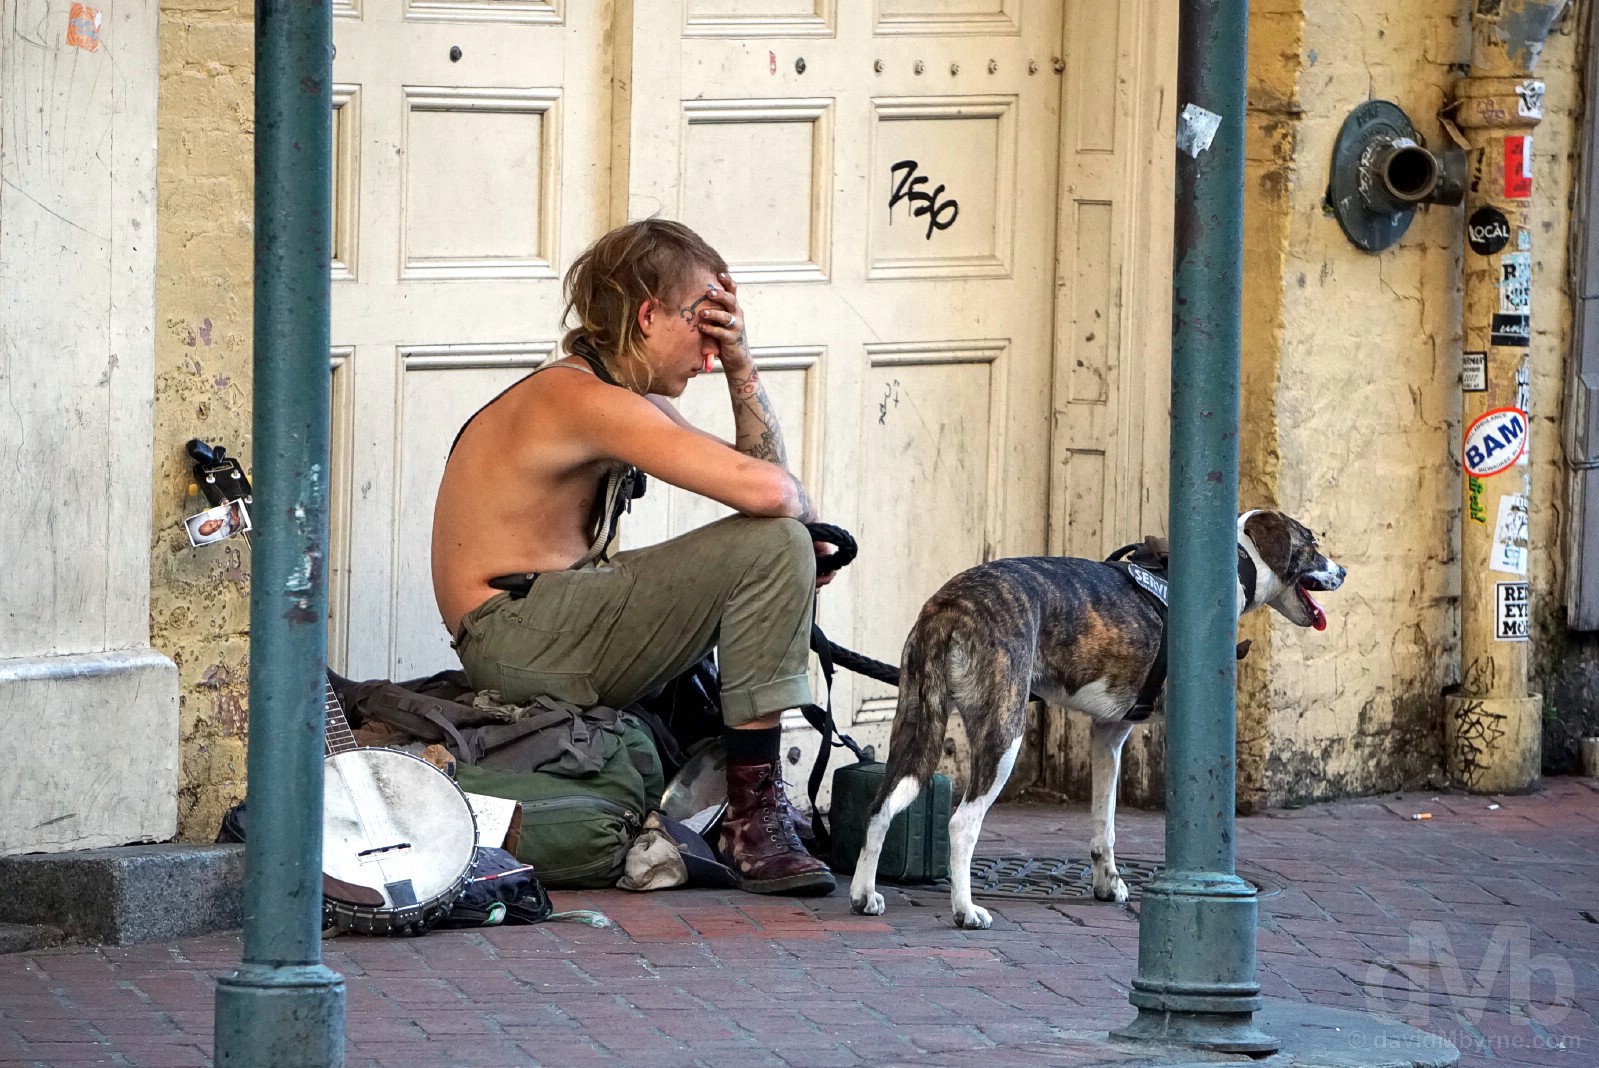 French Quarter, New Orleans, Louisiana. October 12, 2017.